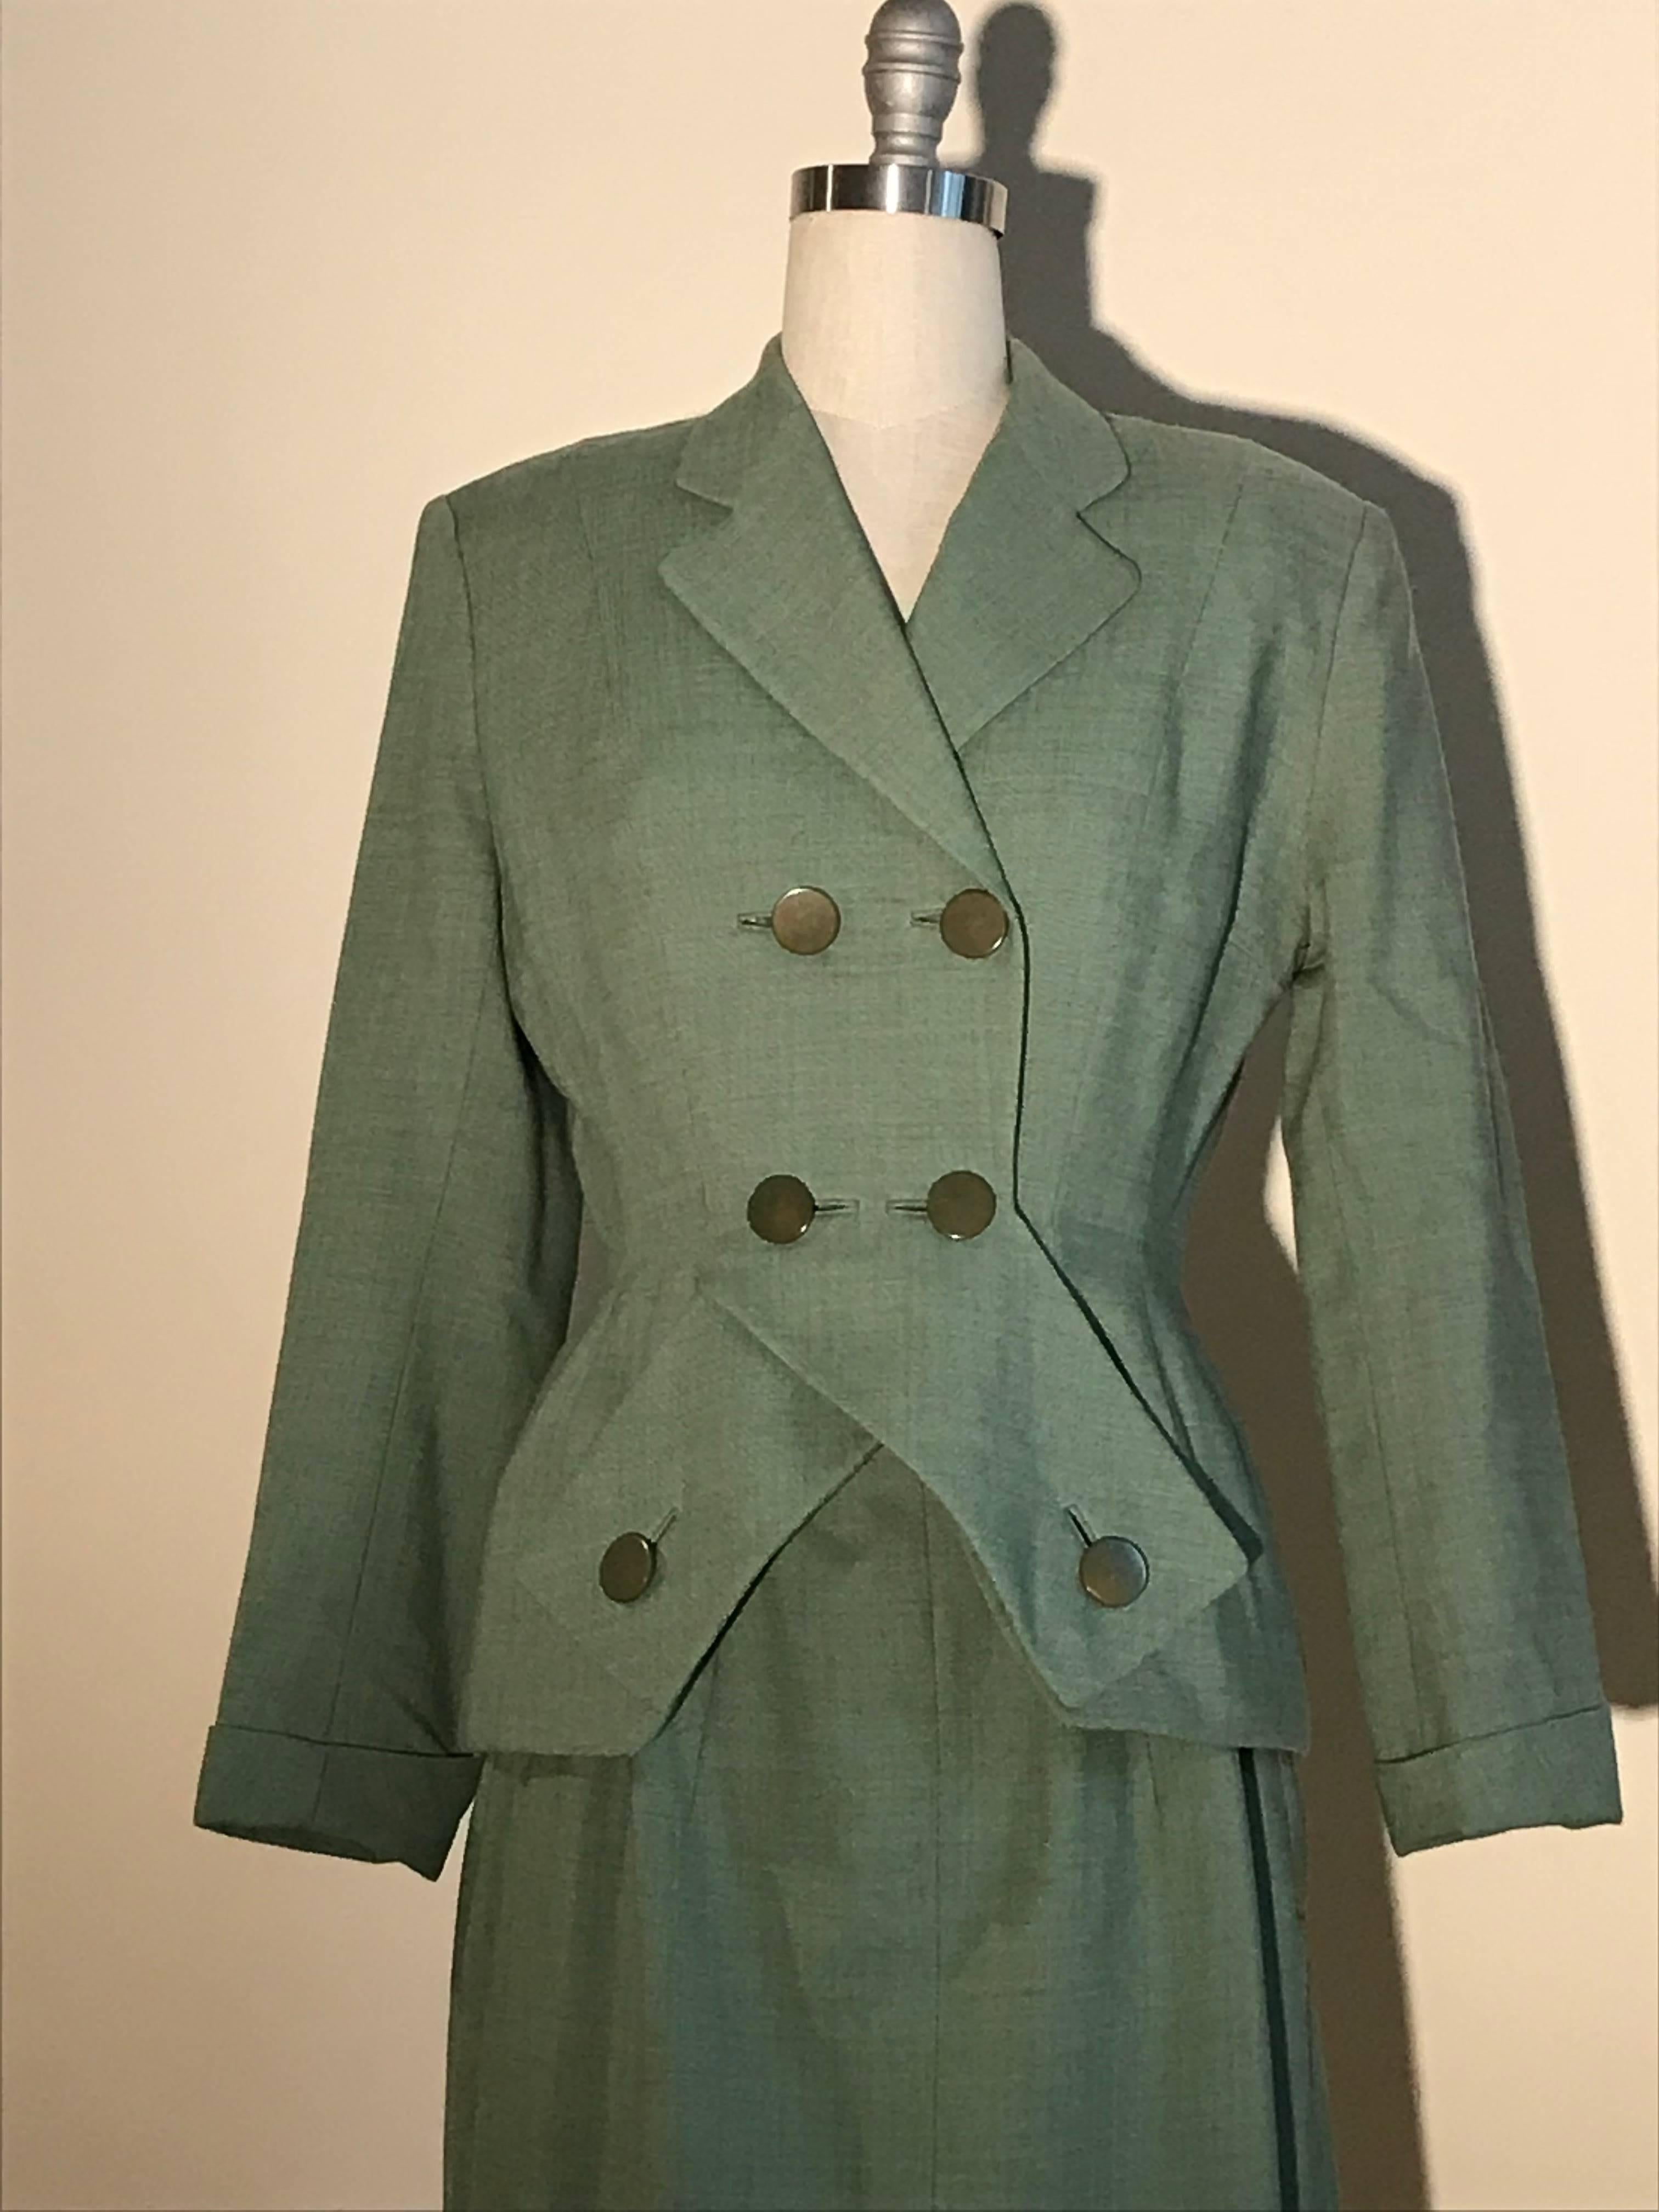 Schiaparelli sage green midi length skirt suit, estimated late 1940s, early 1950s. Criss cross panel at front jacket fastens with mottled green buttons. Light padding at jacket hip creates a New Look shape. Pockets concealed in jacket seam. Cuffed